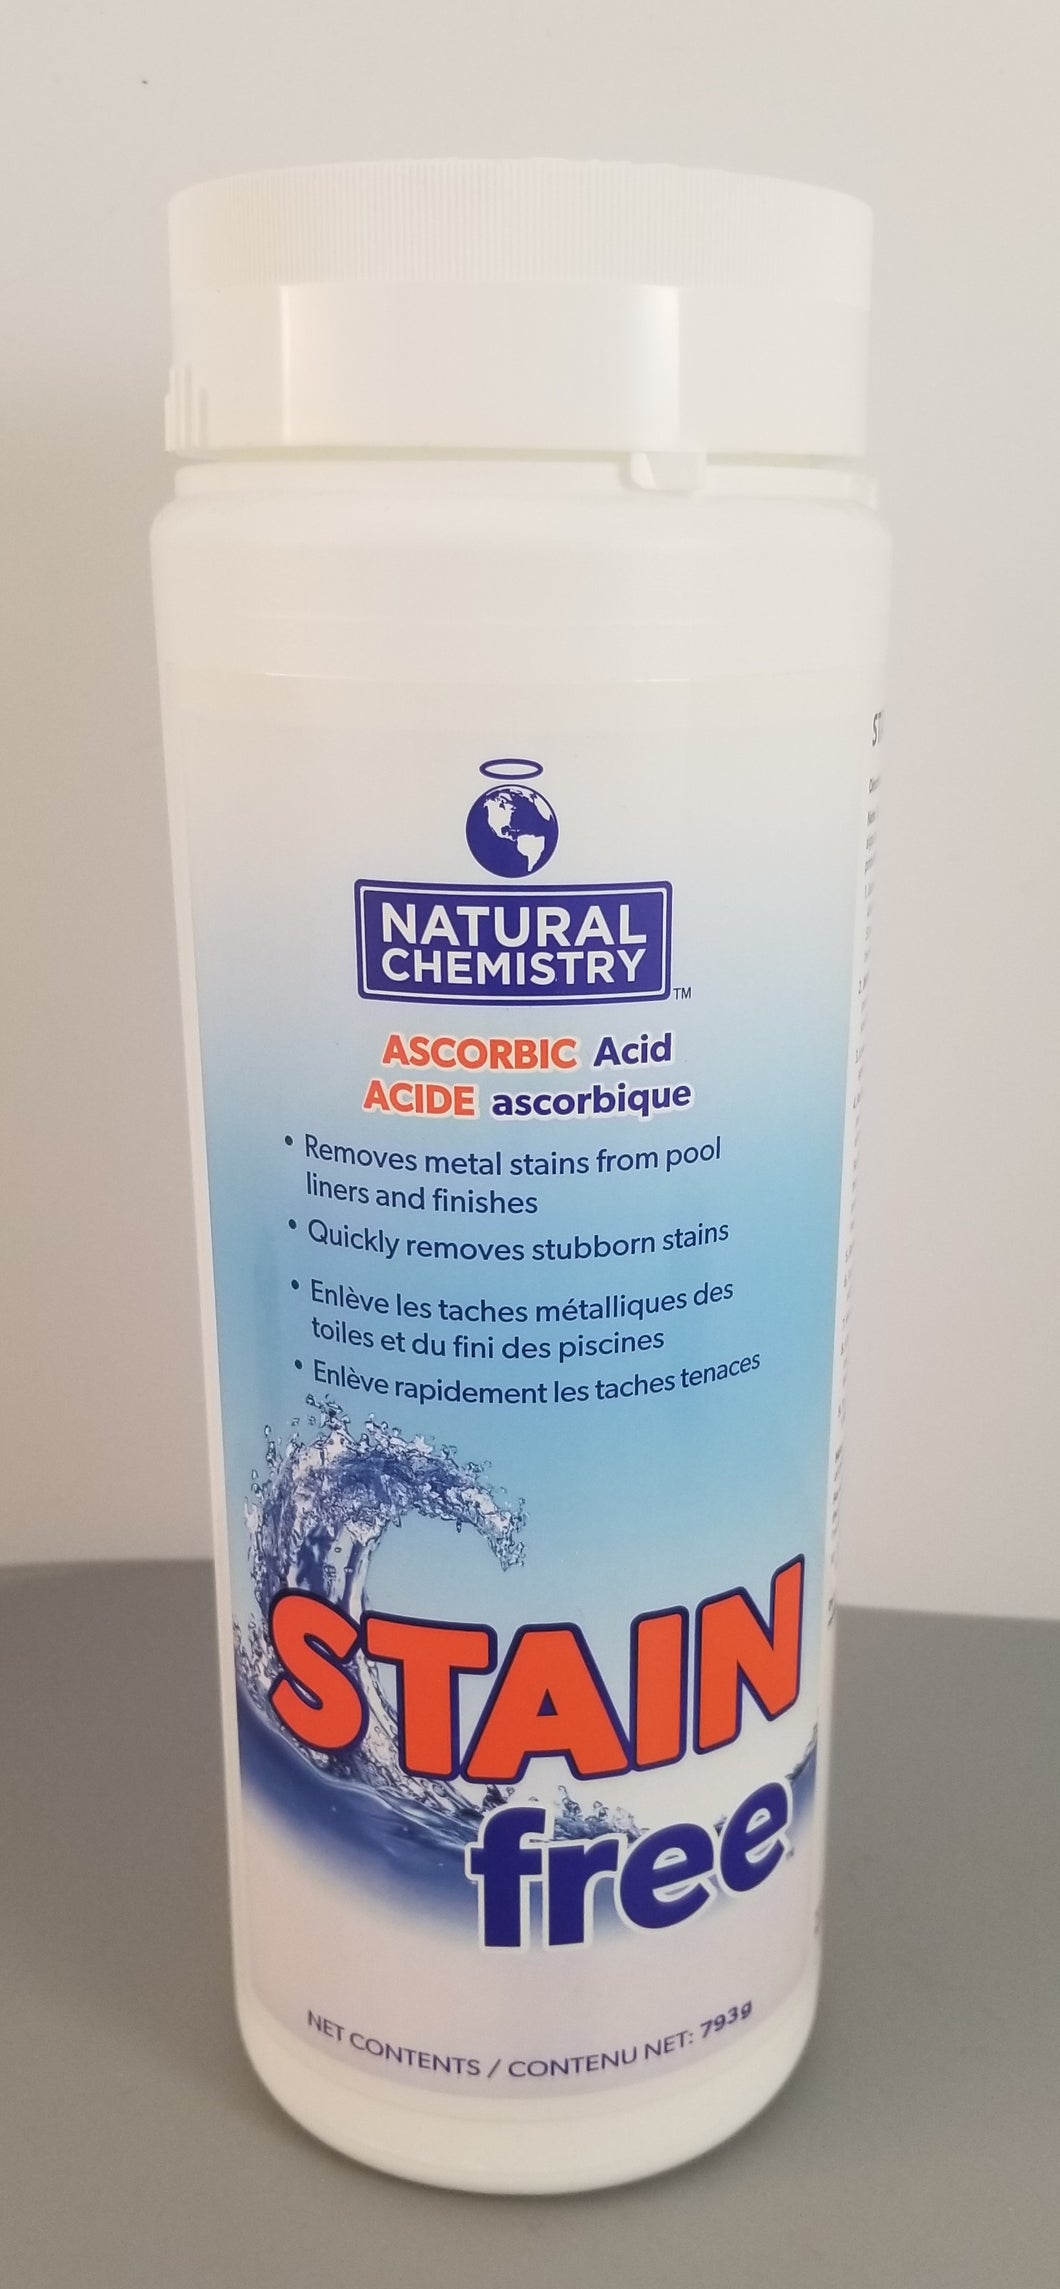 STAIN FREE 1.75LB